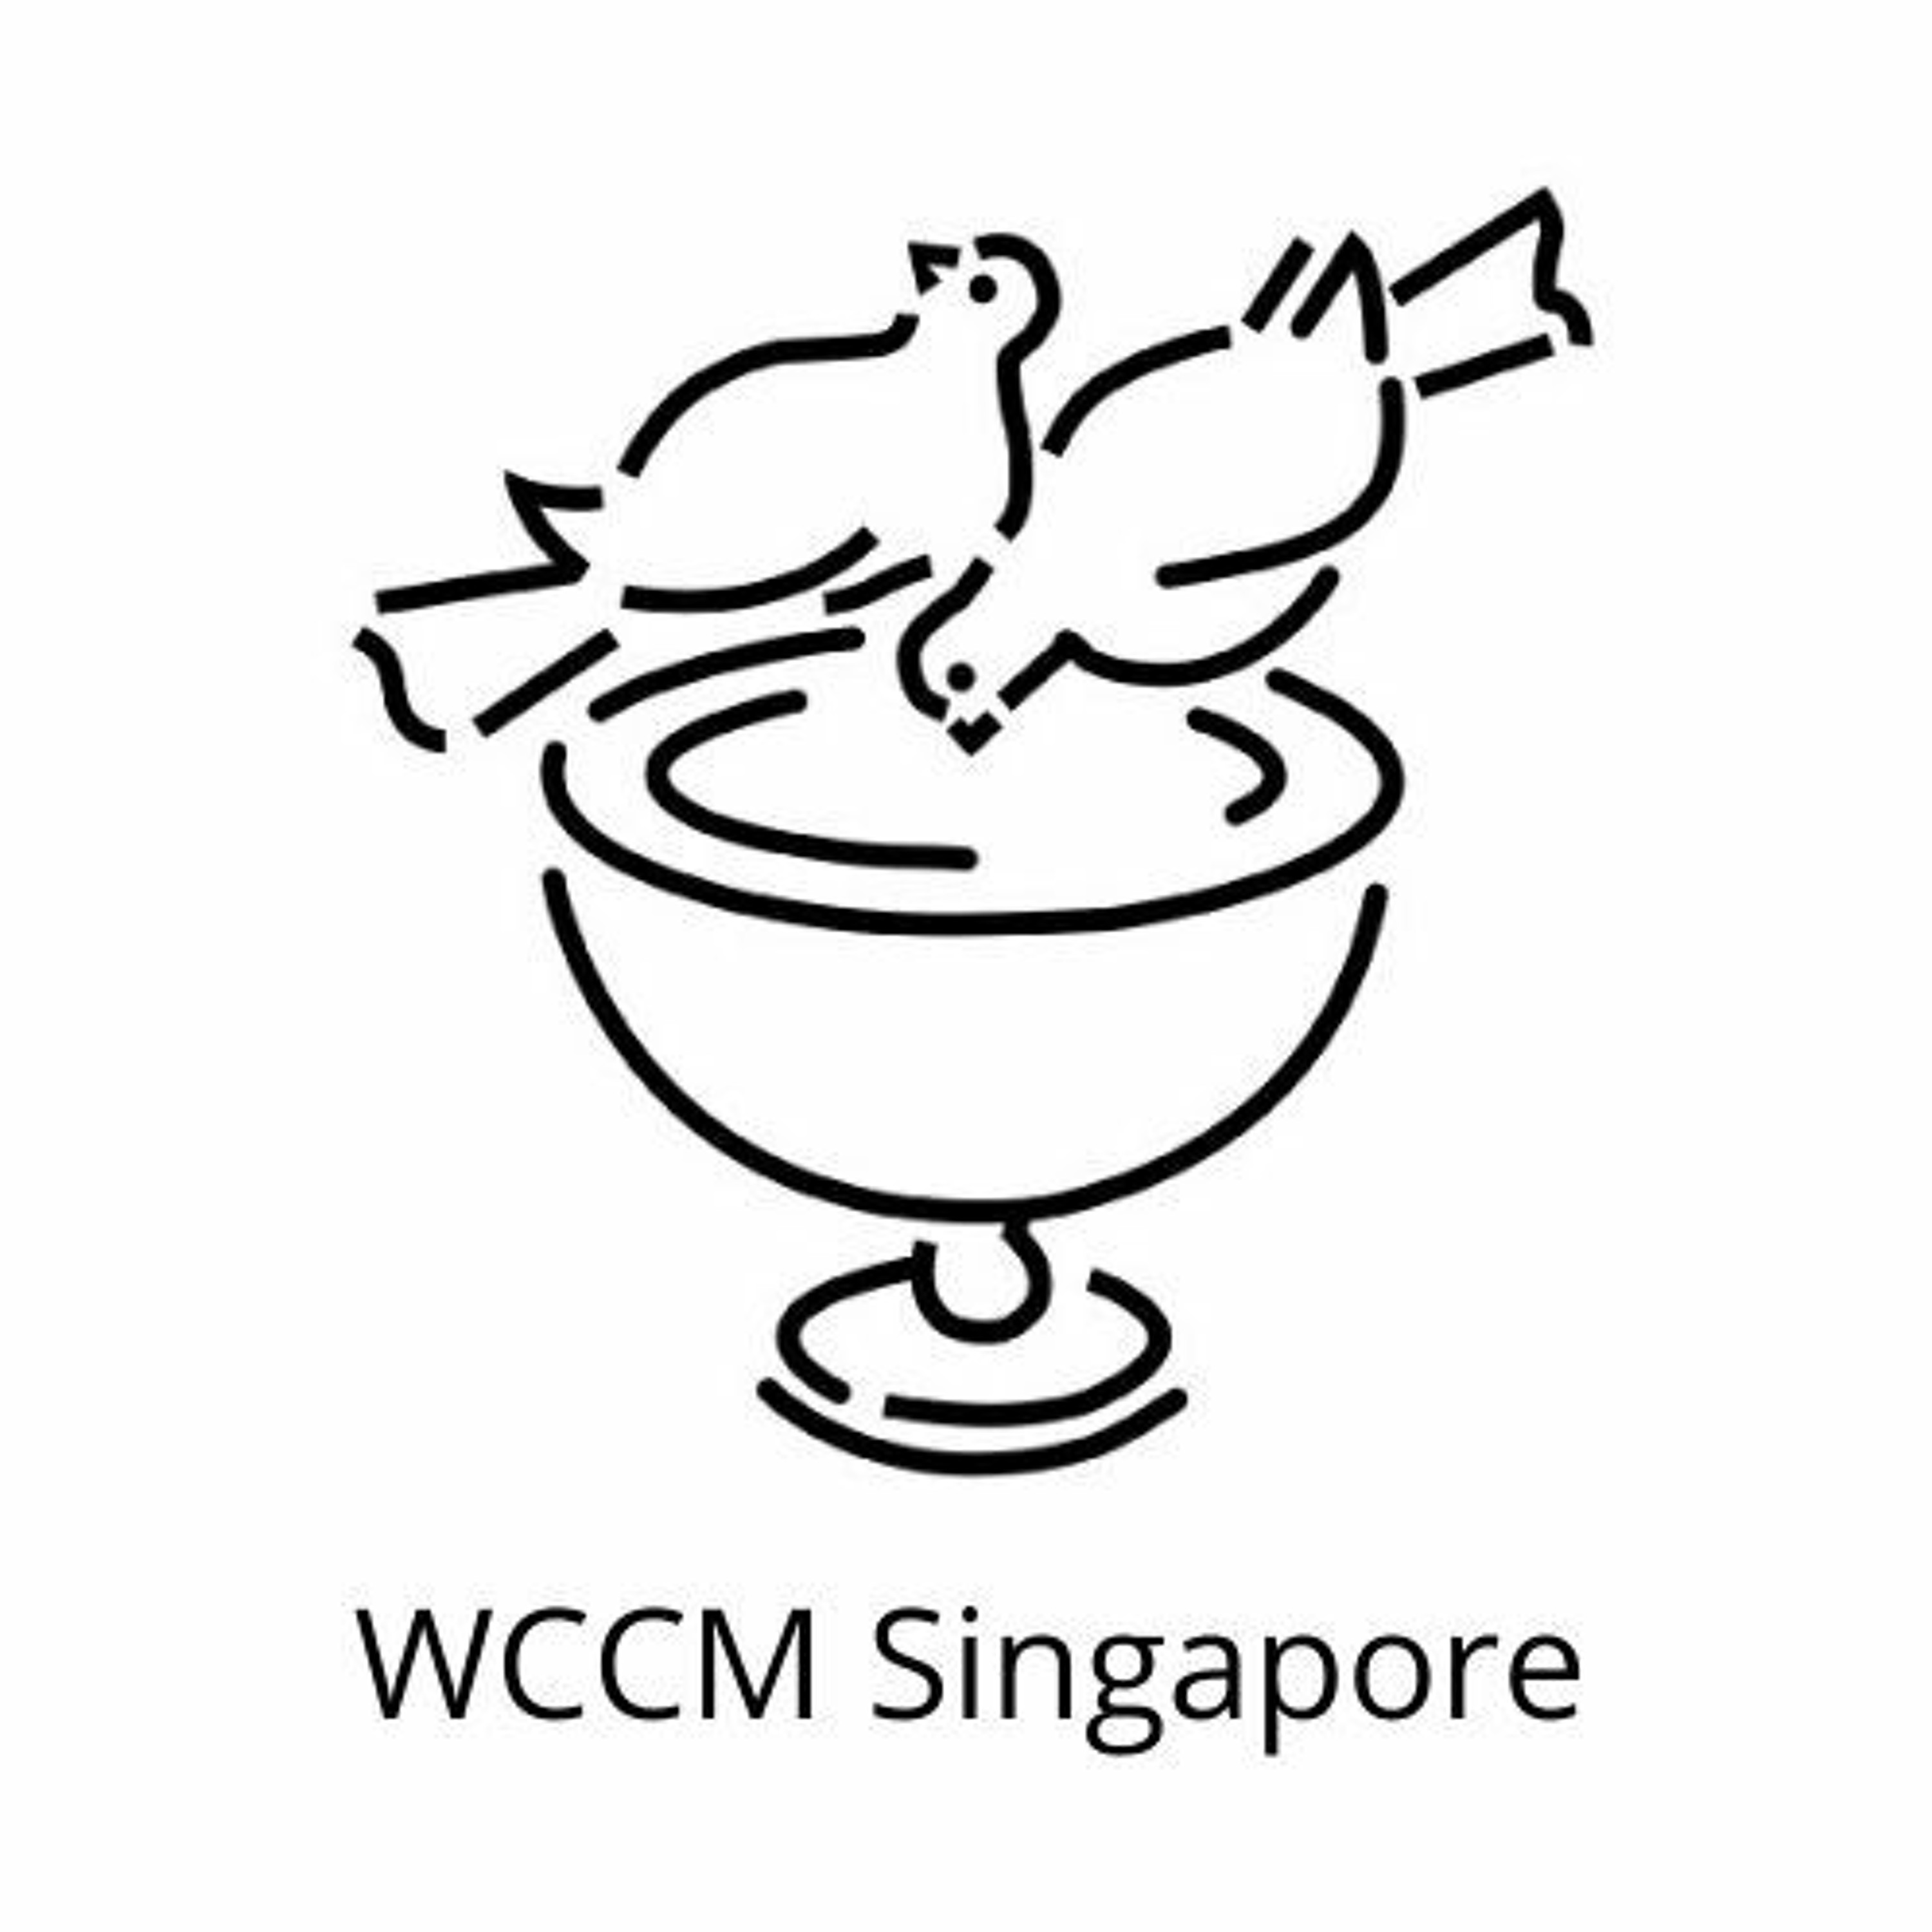 WCCM Singapore online meditation with Fr Laurence Freeman: Q&A